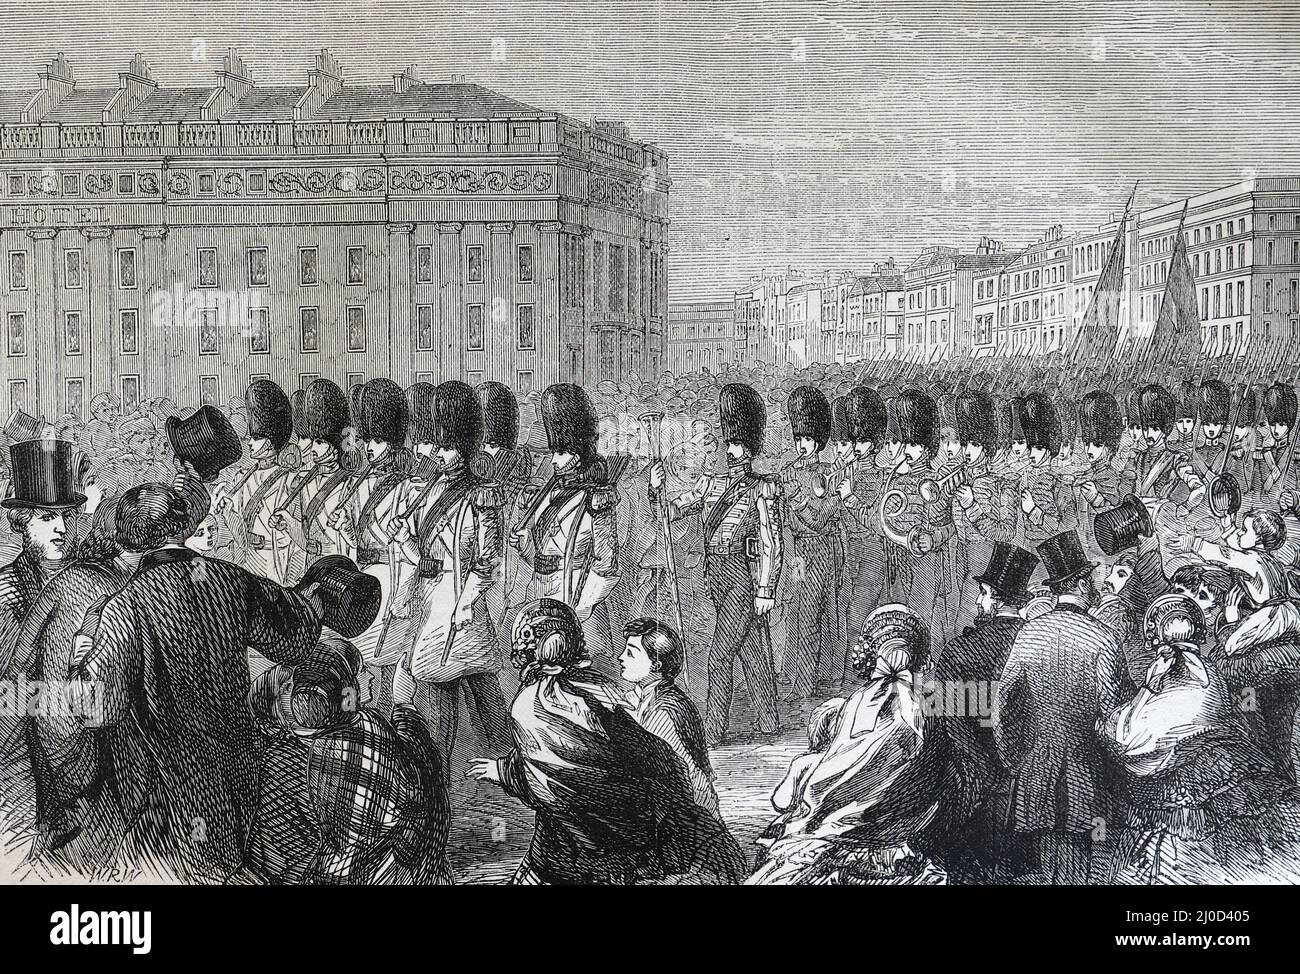 British Guards parading through London, leaving for the Crimea, 1854. Black and White Illustration Stock Photo